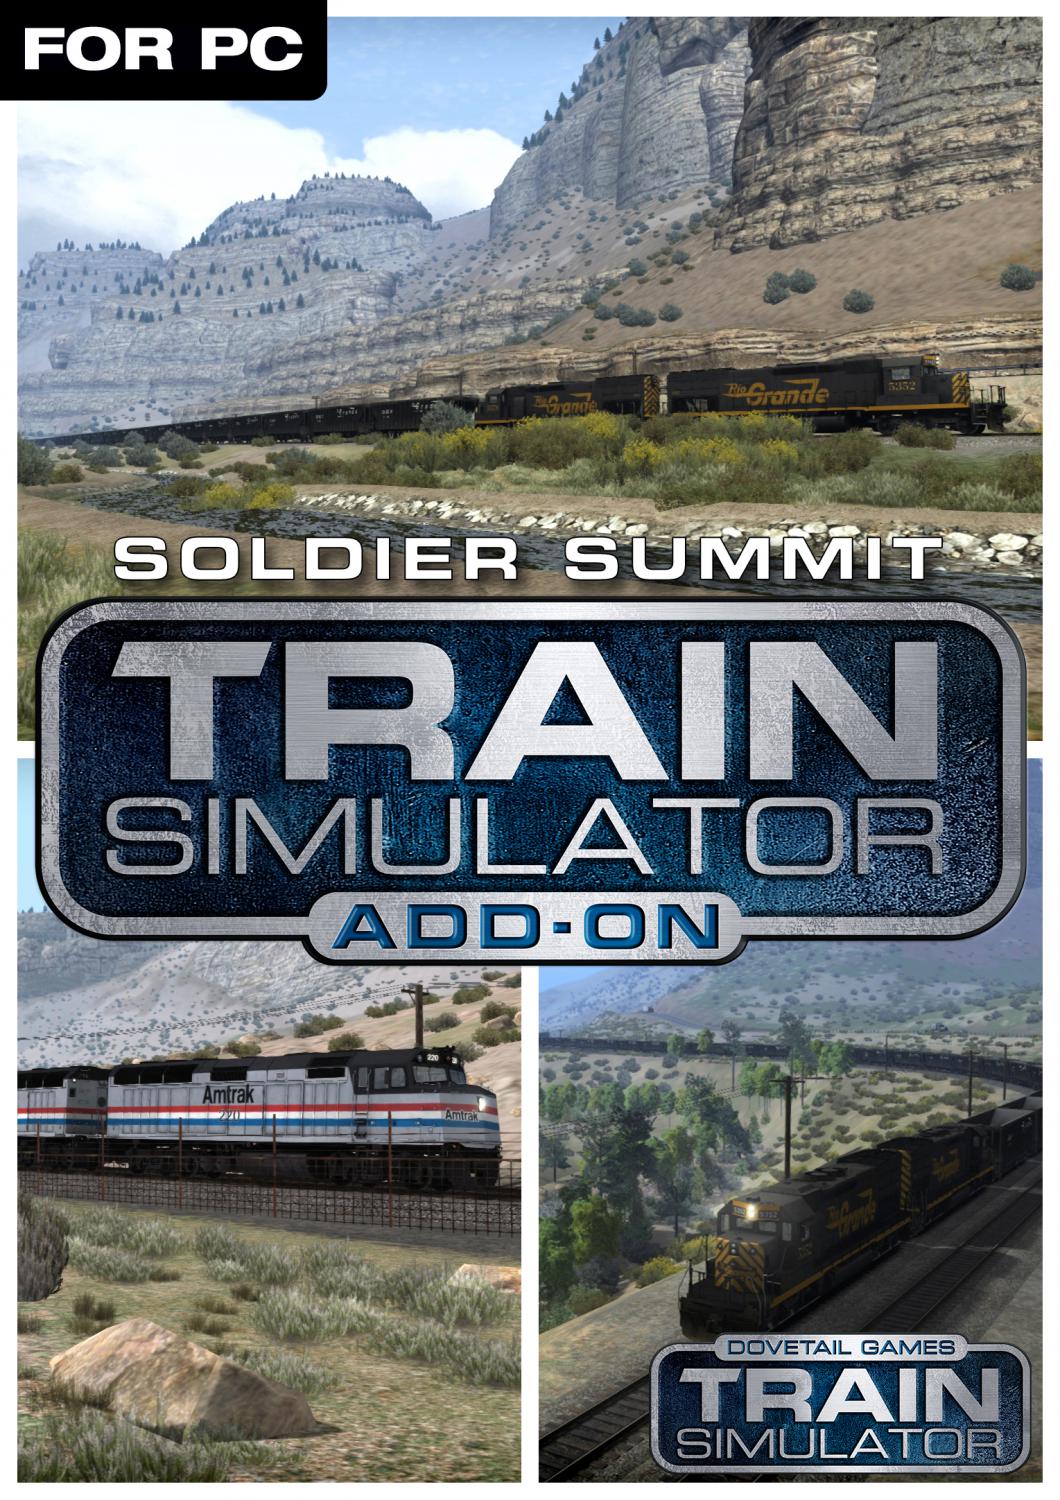 Soldier Summit Route Add-On